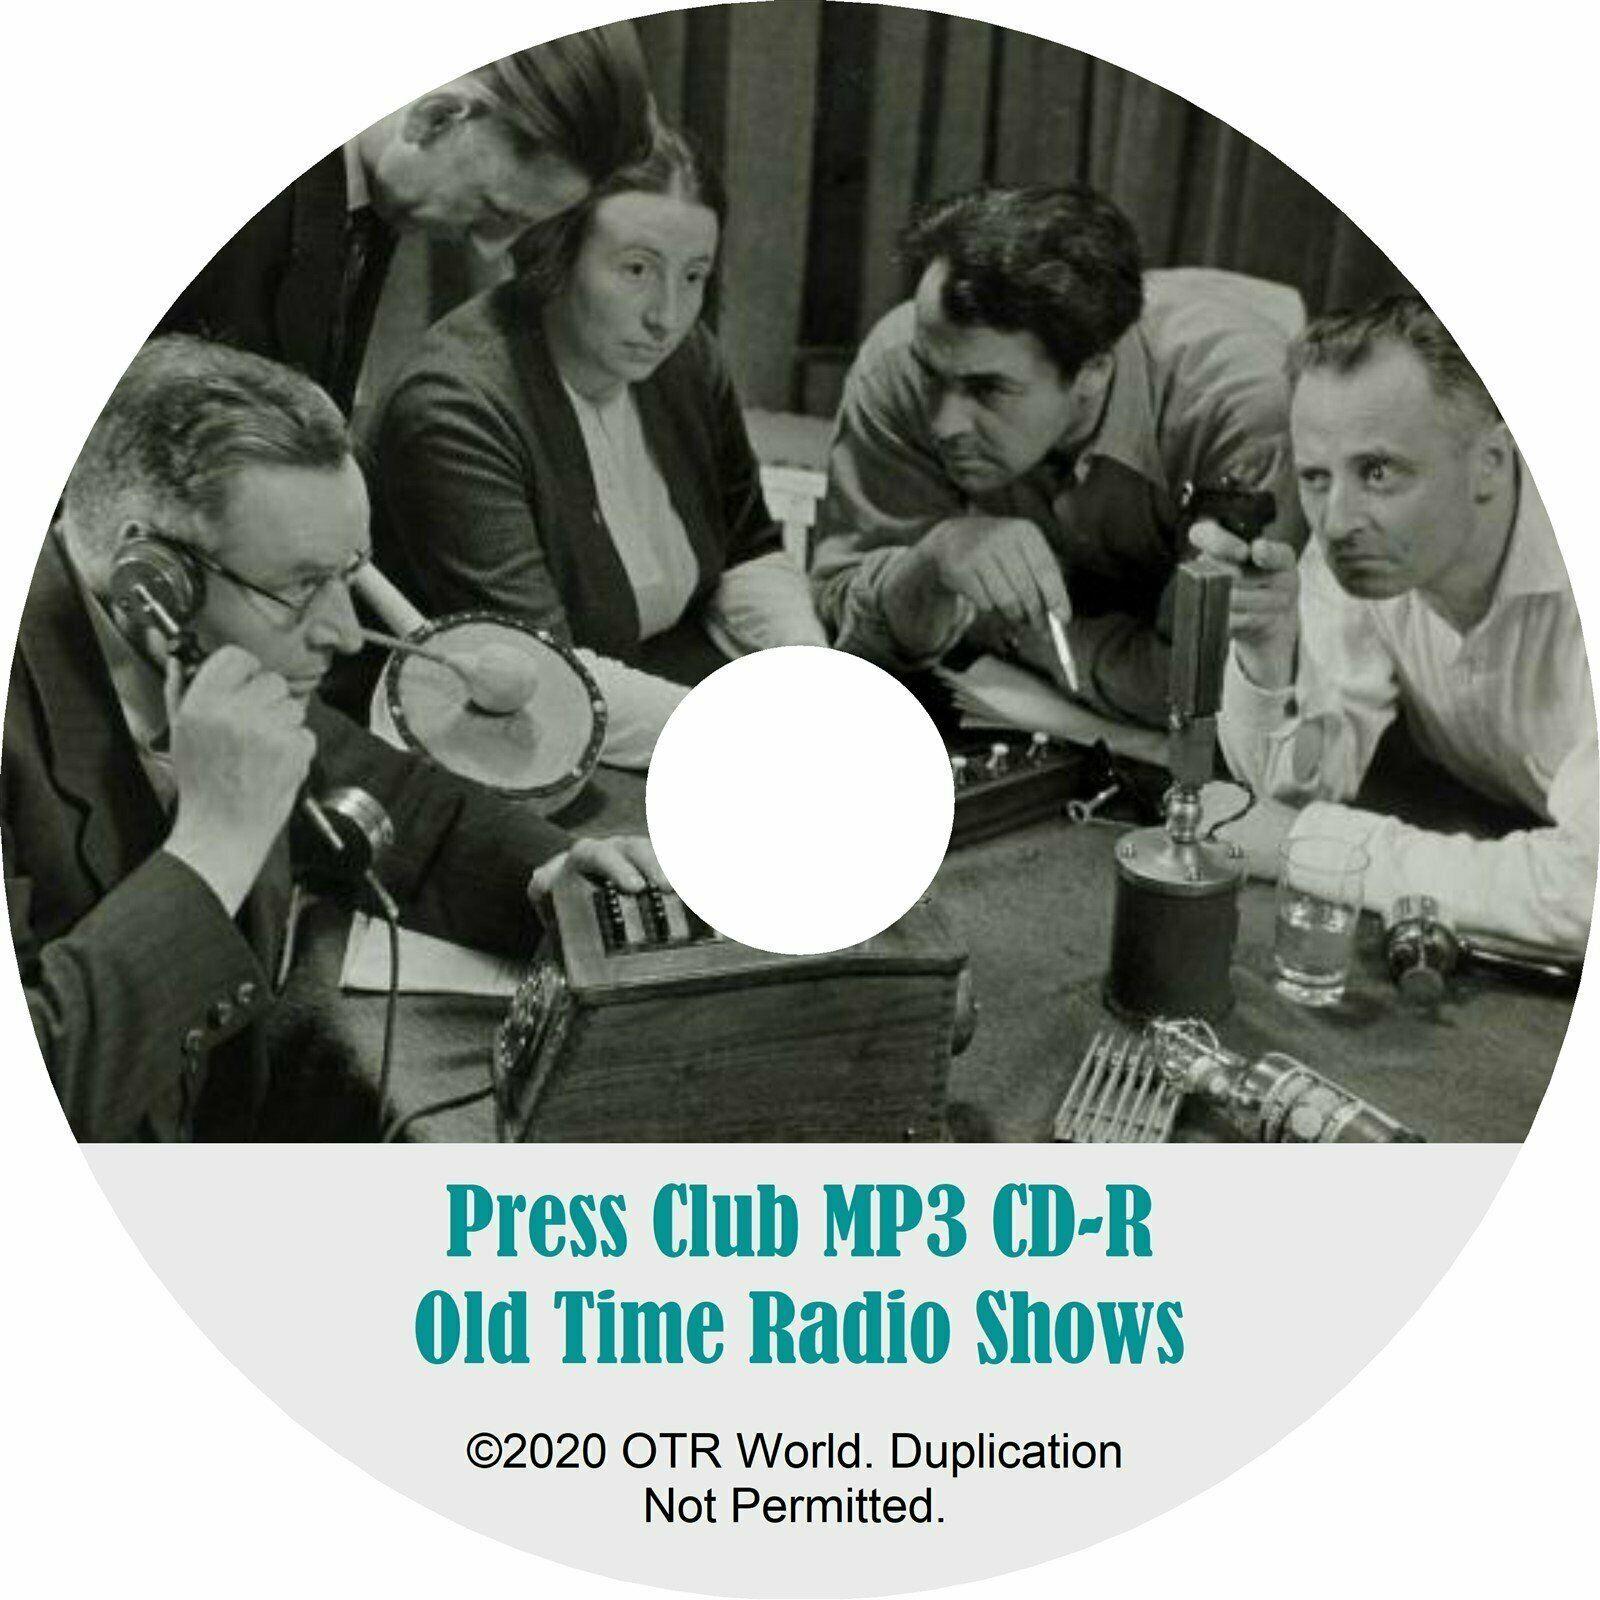 Press Club OTR Old Time Radio Shows MP3 On CD 2 Episodes